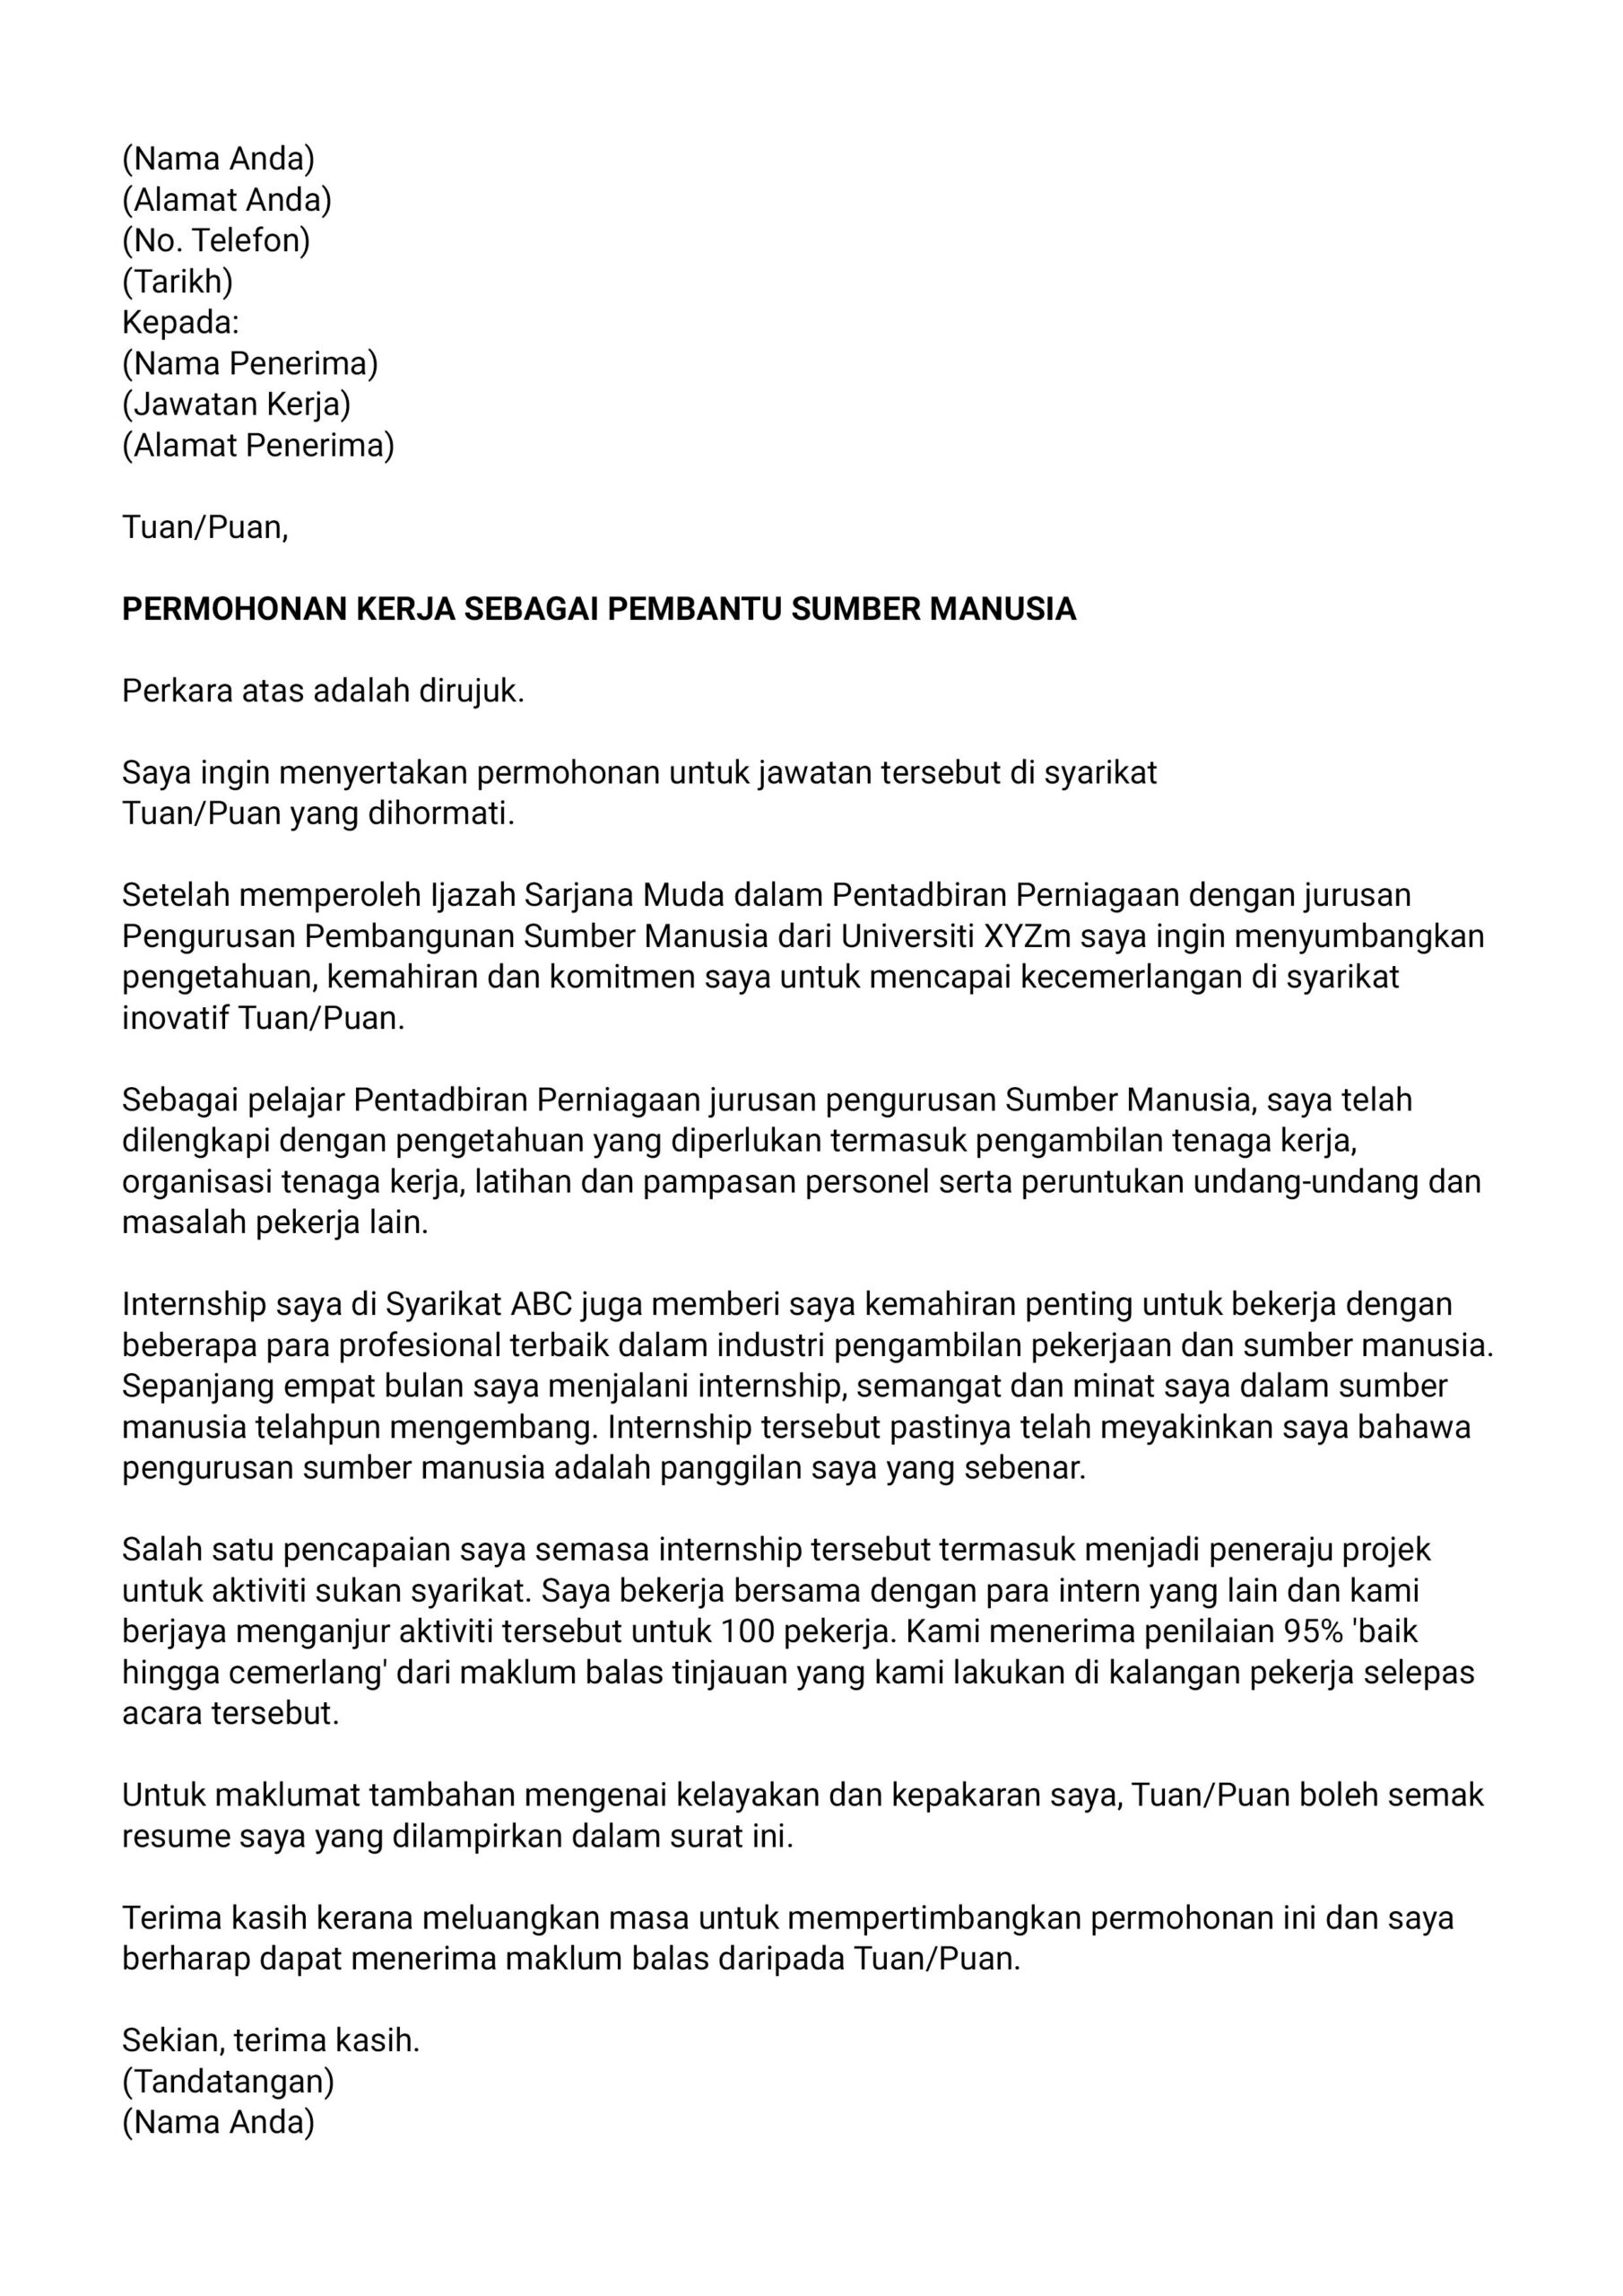 cover letter meaning in bahasa melayu